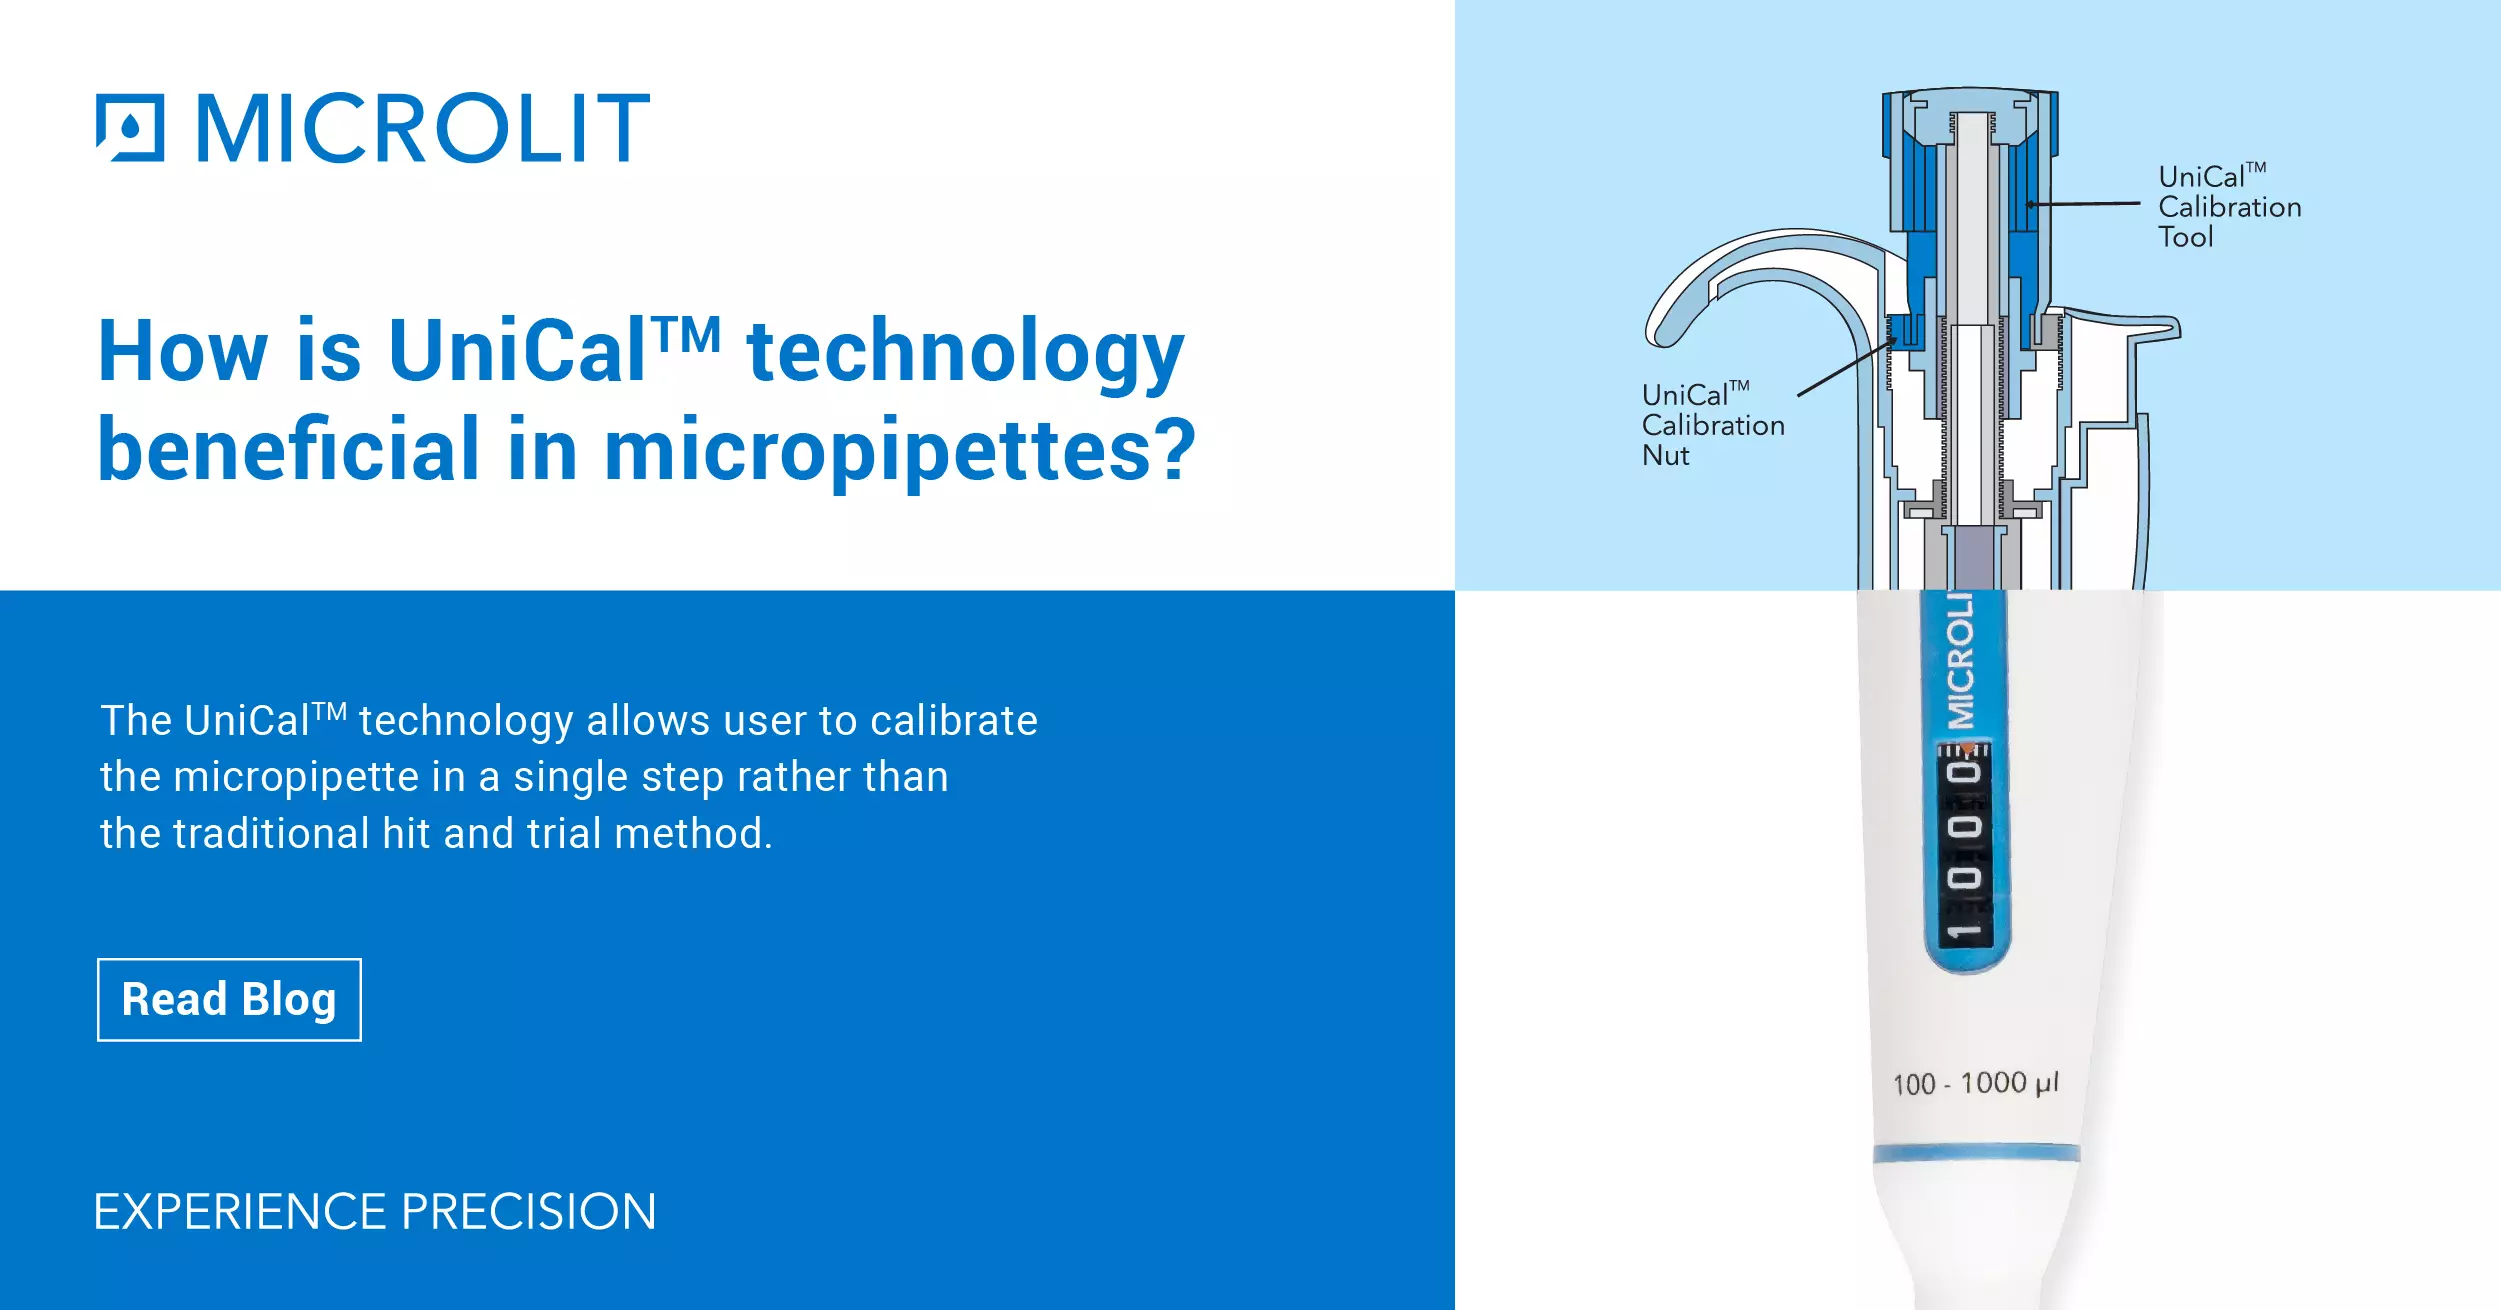 How is patented UniCal technology beneficial in micropipettes?